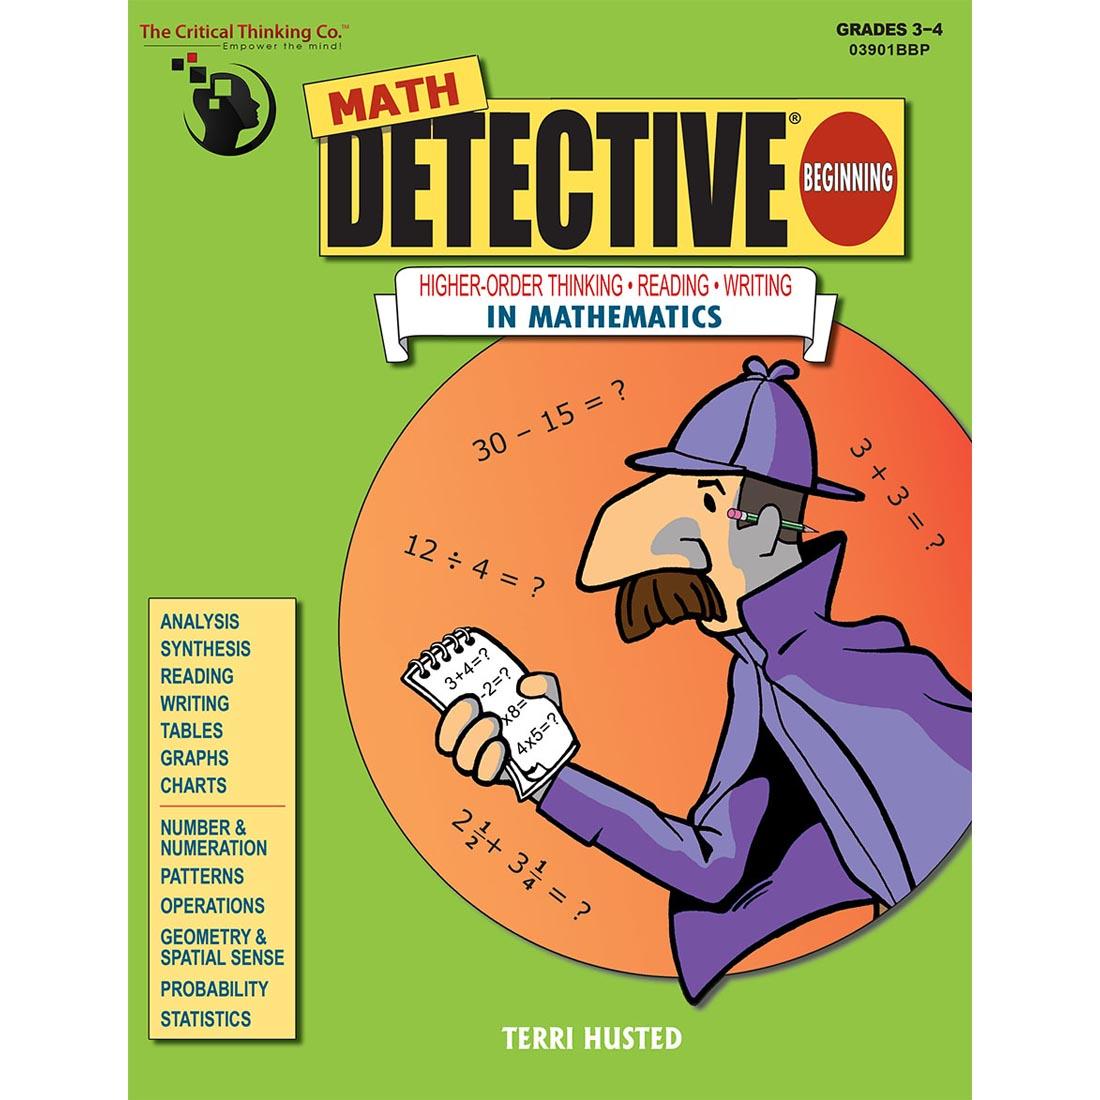 Math Detective Book - Higher-Order Thinking, Reading & Writing